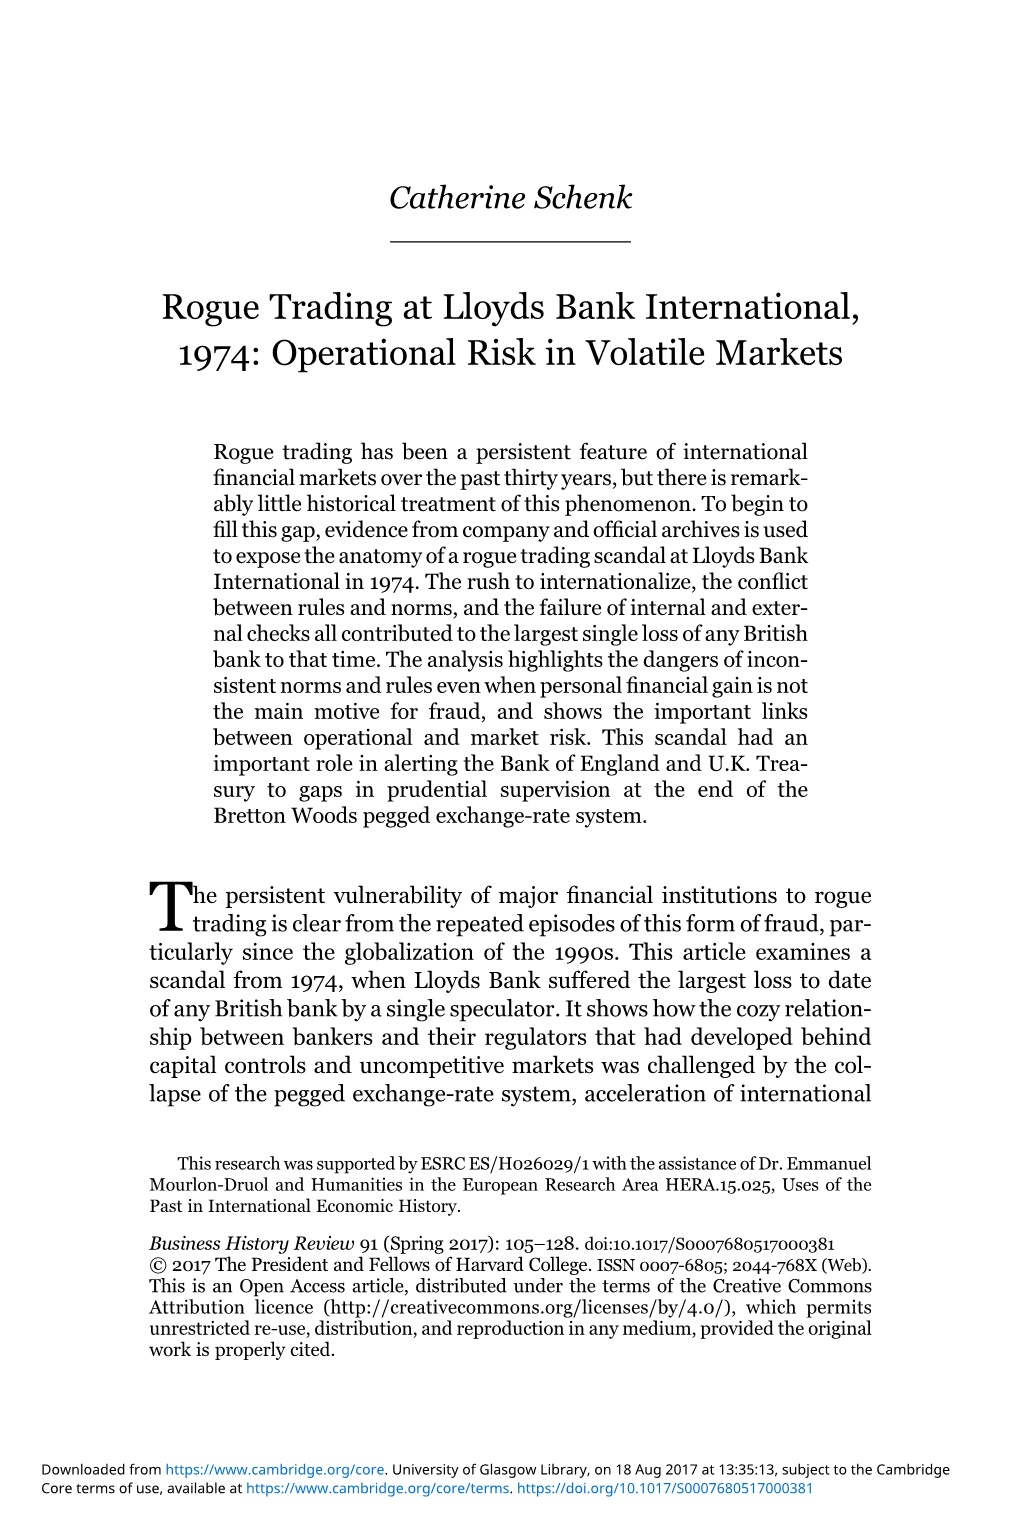 Rogue Trading at Lloyds Bank International, 1974: Operational Risk in Volatile Markets